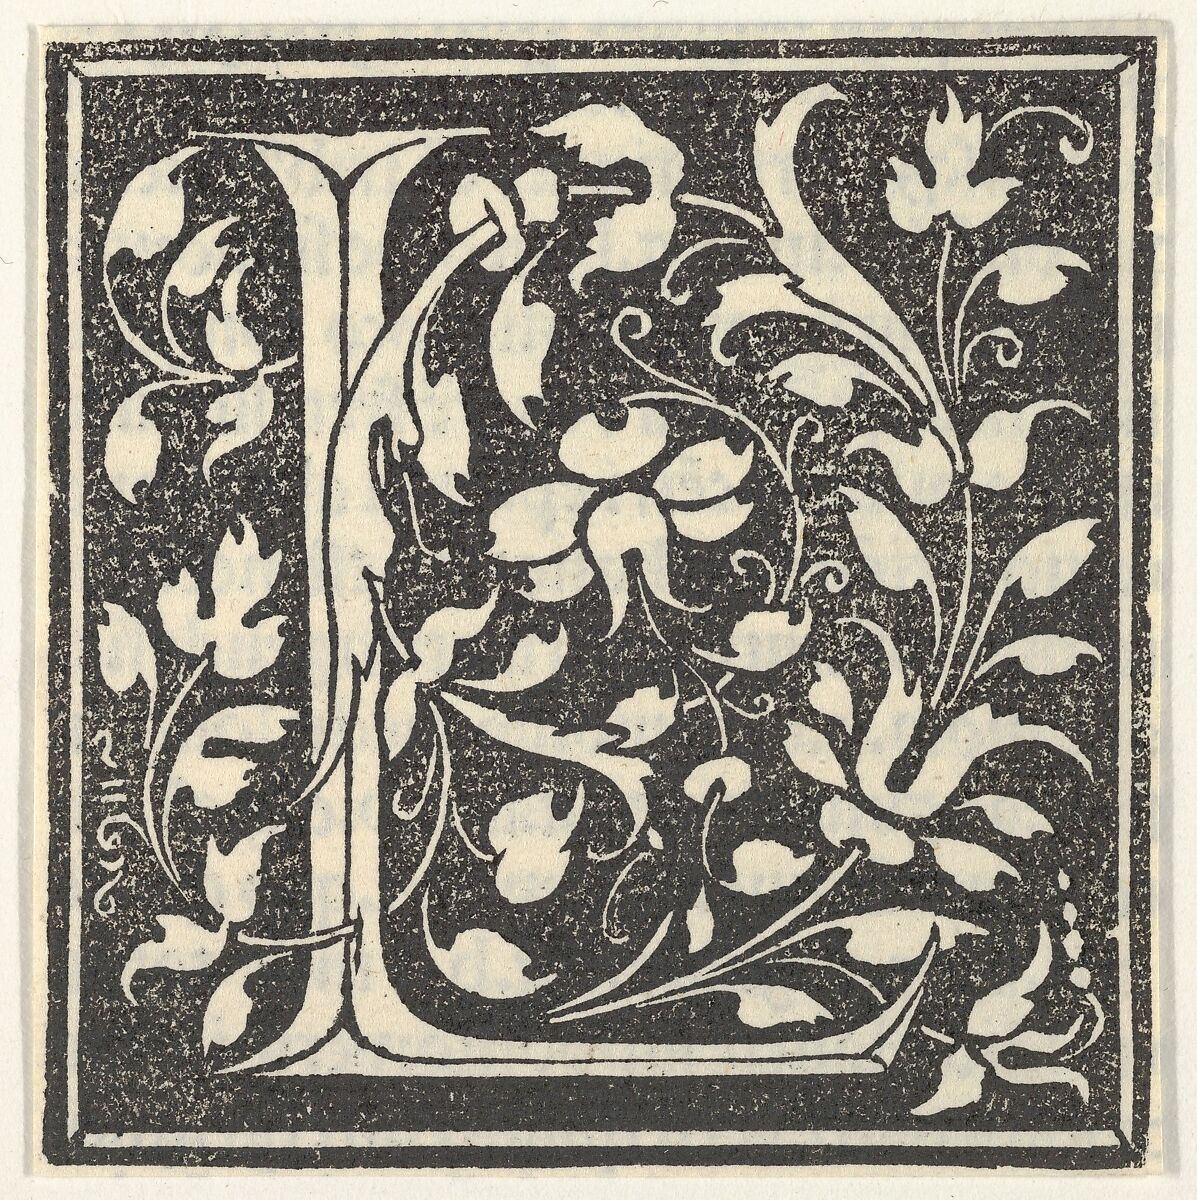 Initial letter L, Anonymous, Italian, 15th century, Woodcut 